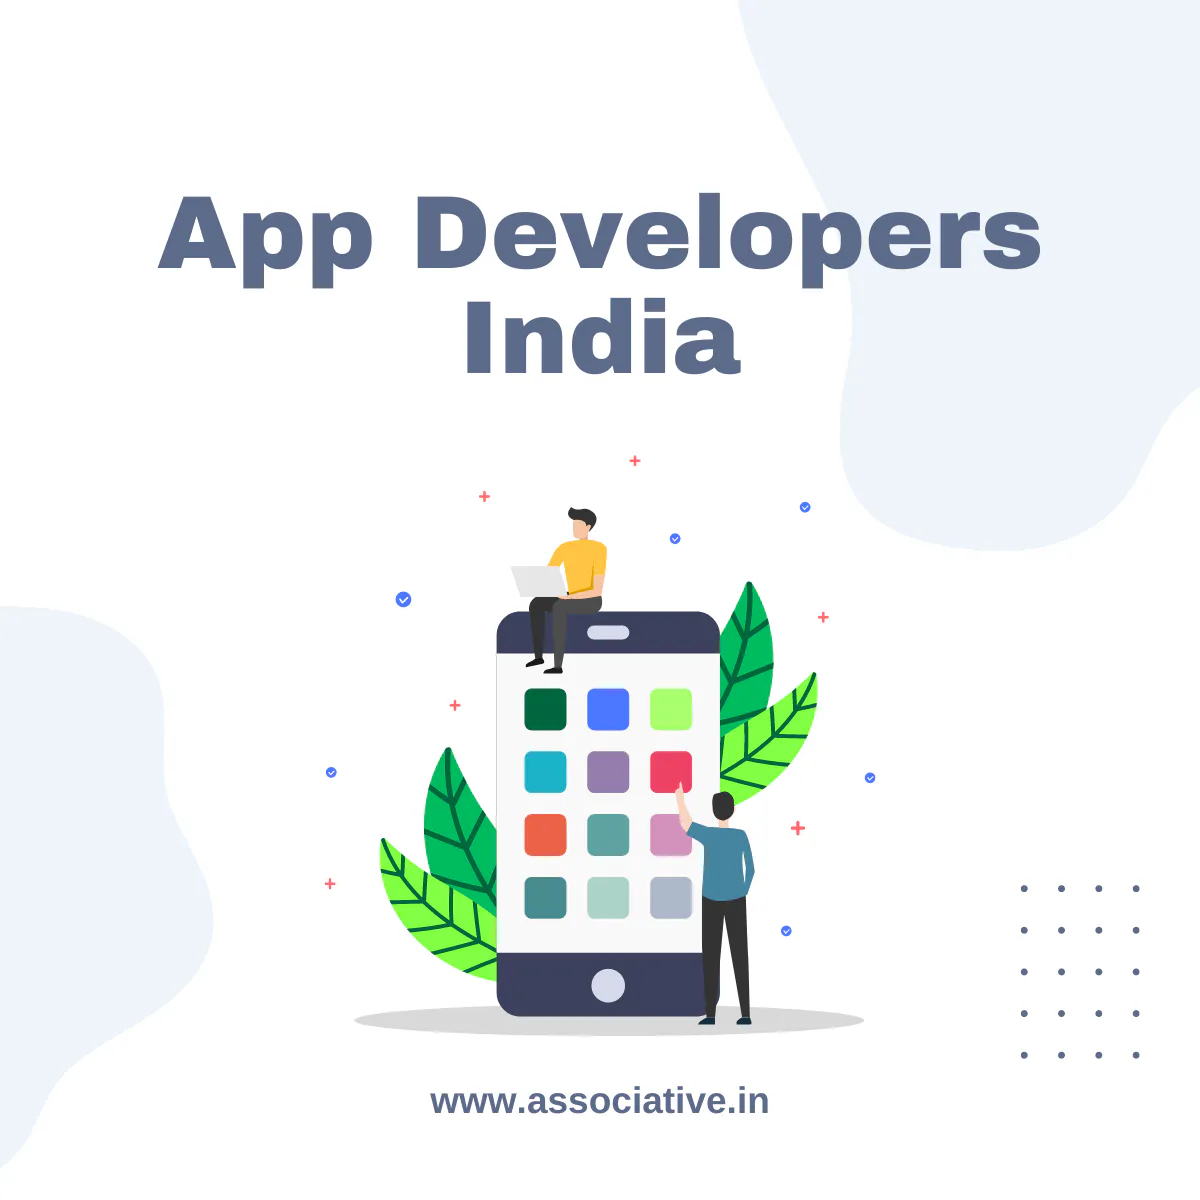 Application Development Firm: Bring Your App Idea to Life with Associative